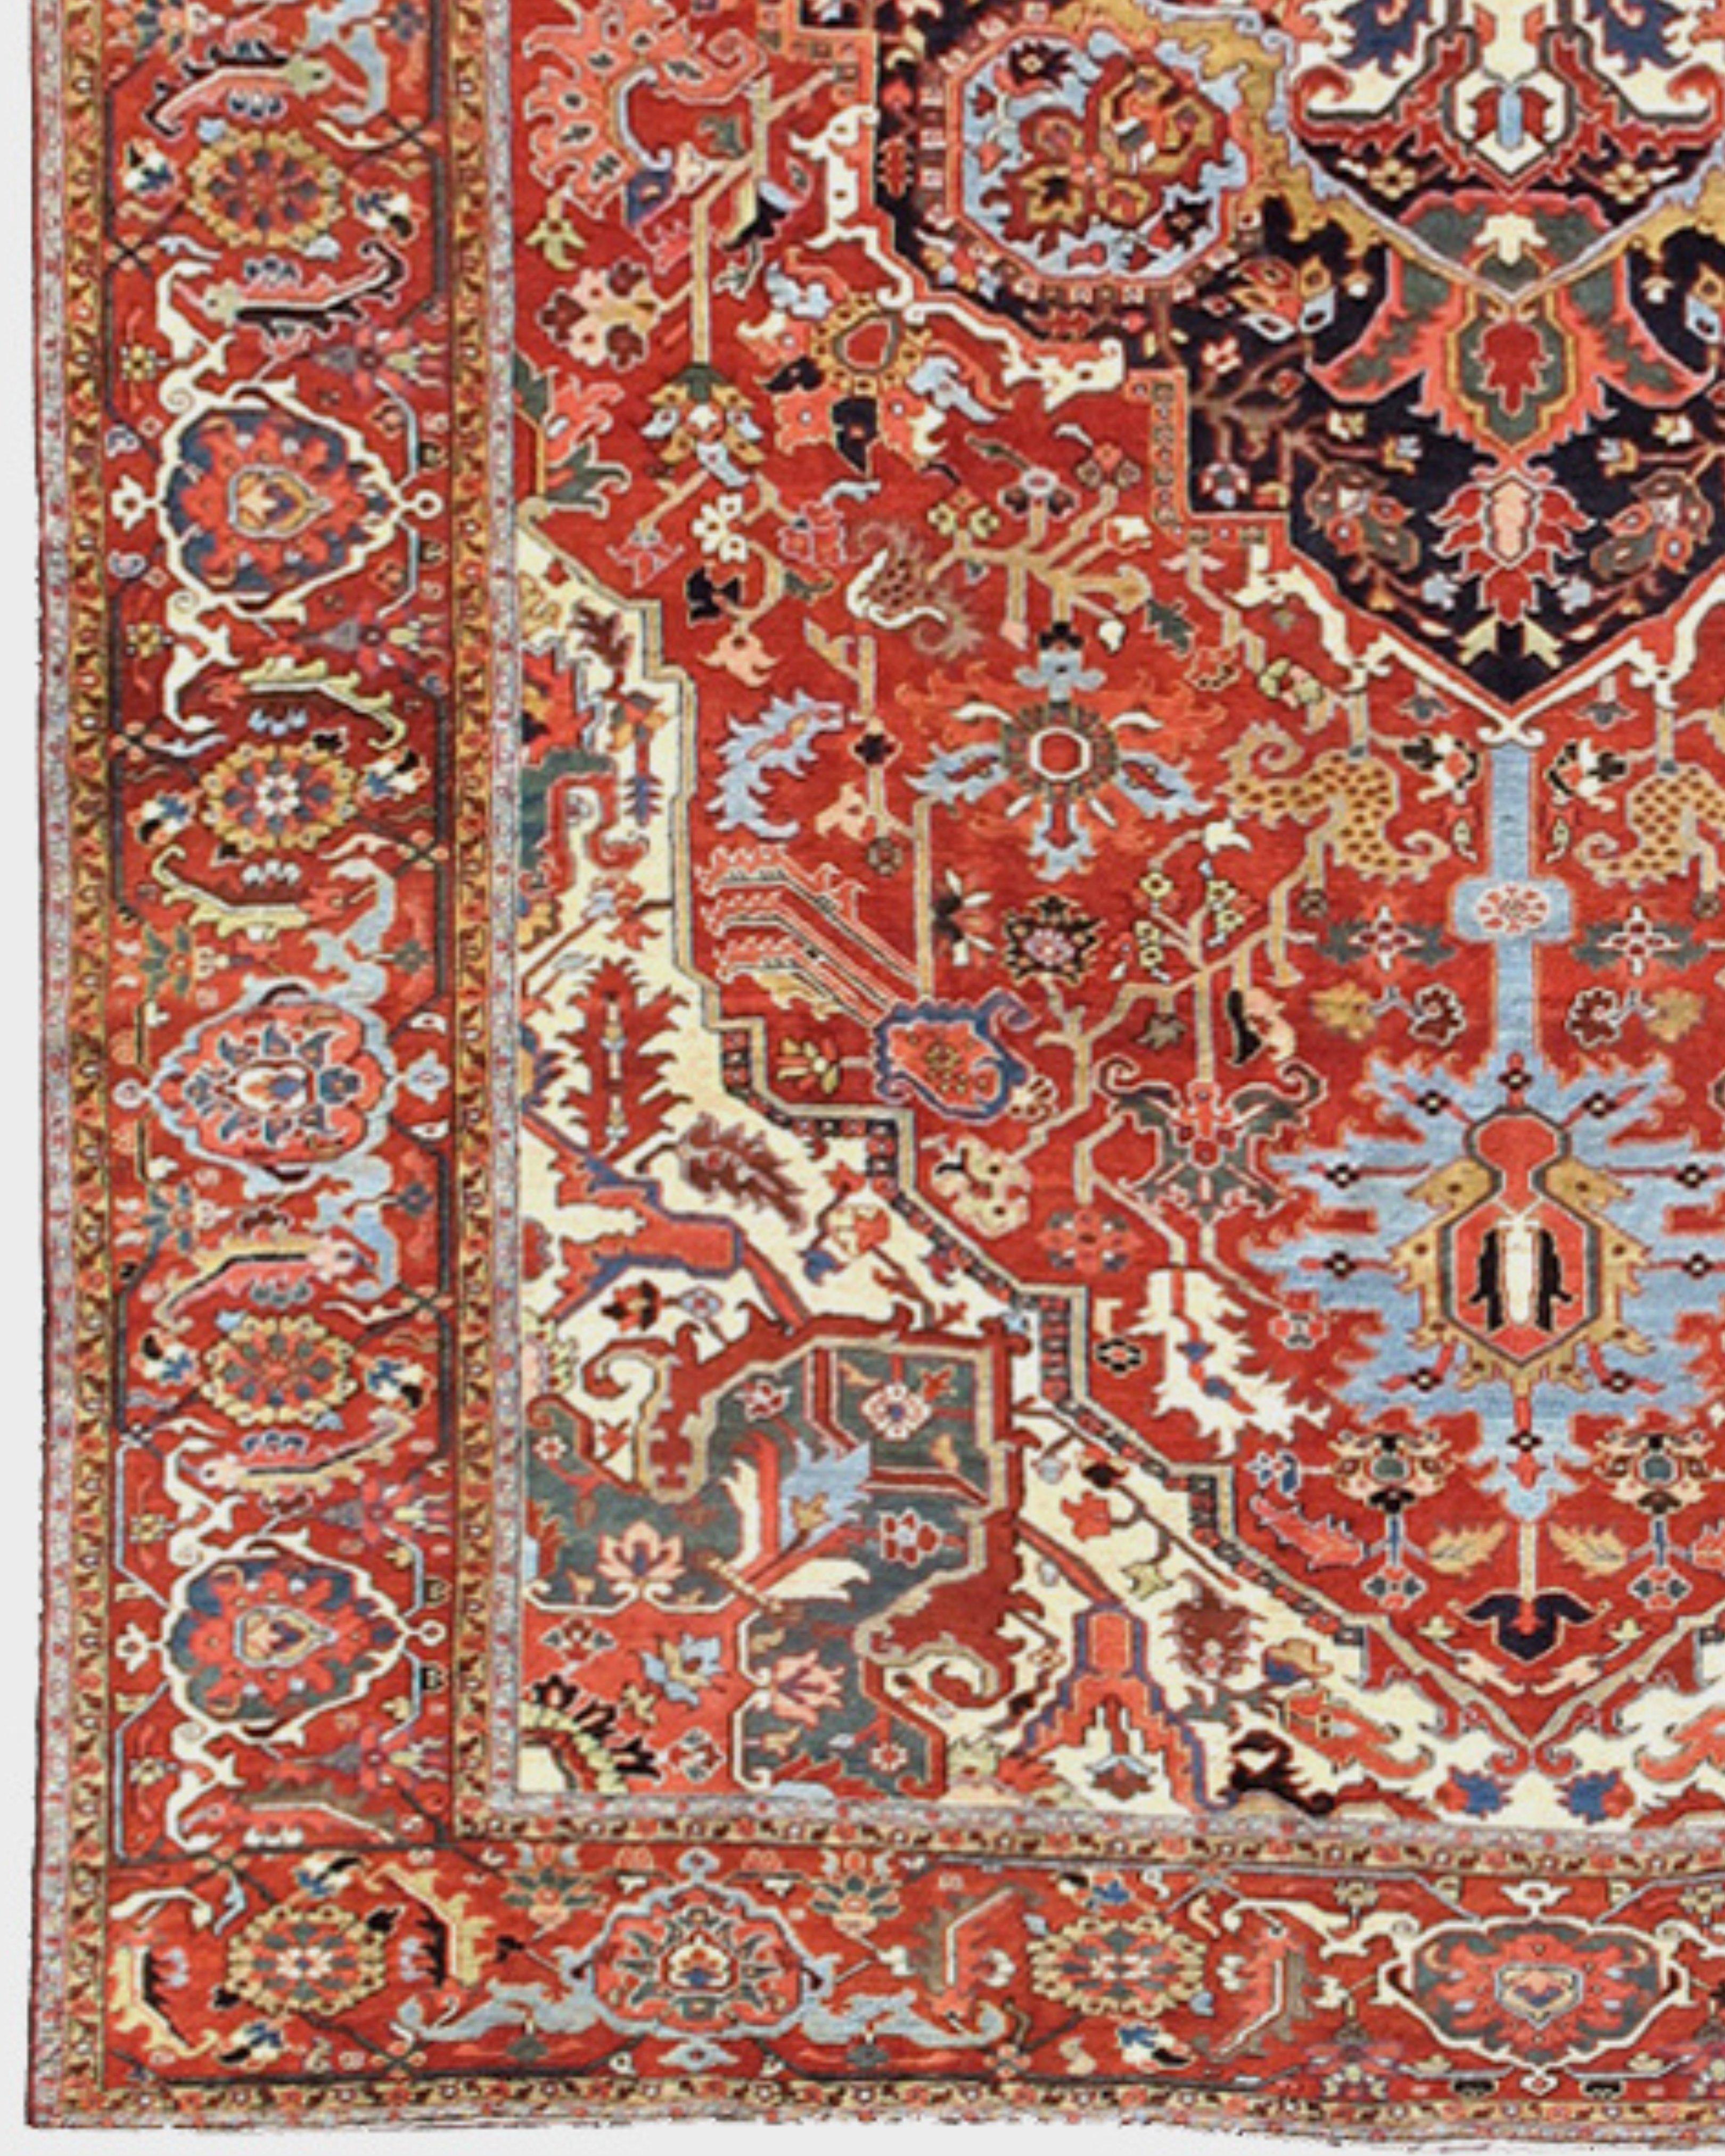 Antique Large Persian Heriz Carpet, Early 20th Century In Excellent Condition For Sale In San Francisco, CA